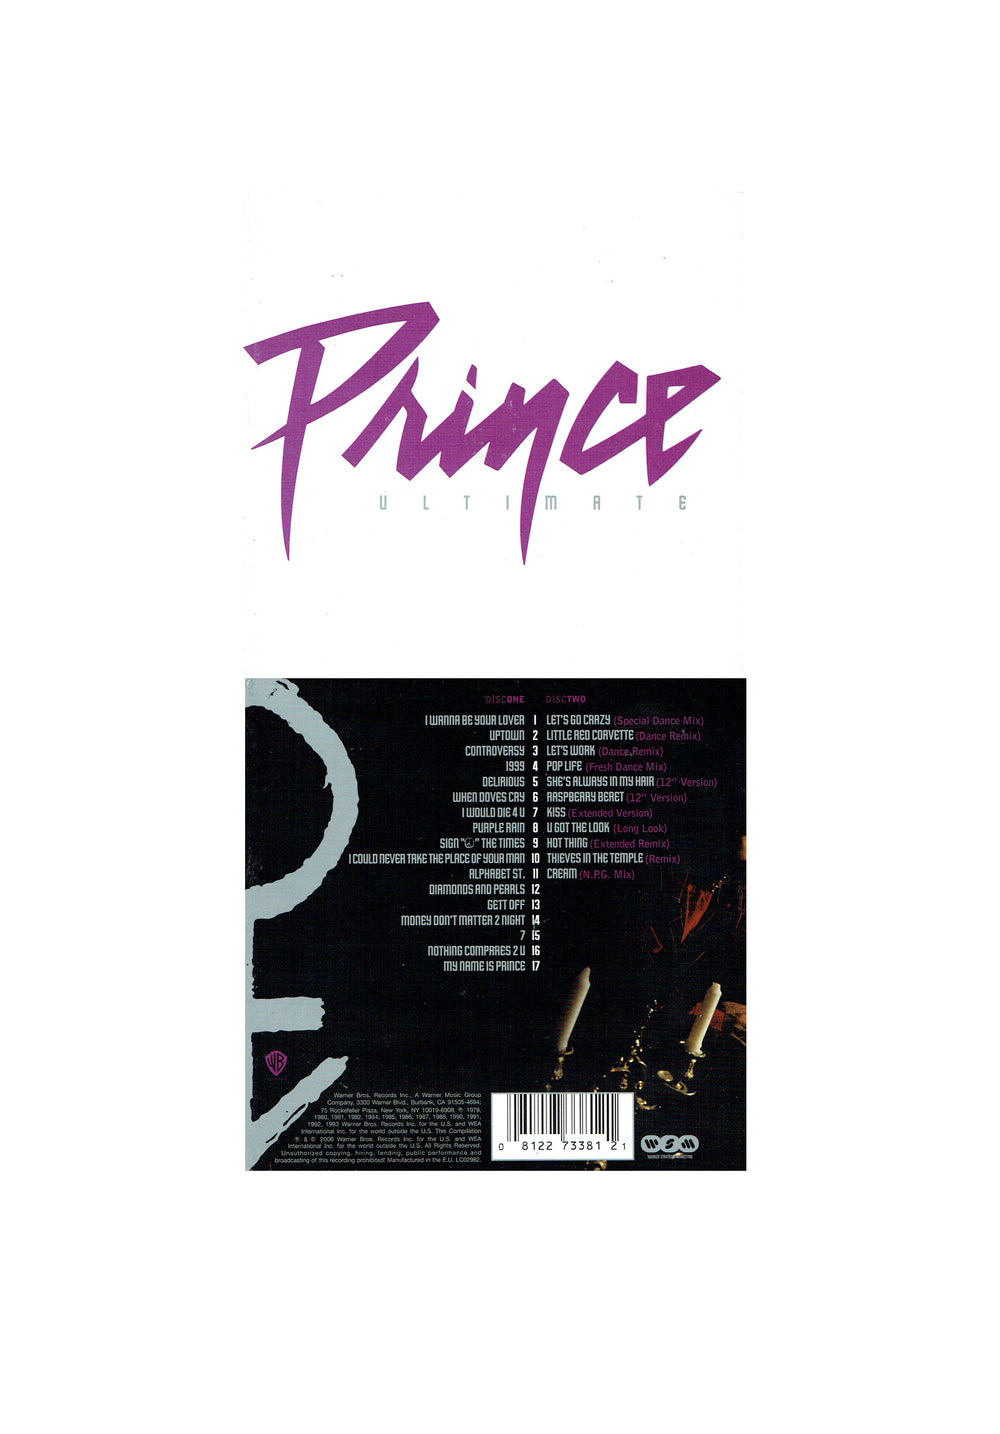 Prince – Ultimate 2 CD Album Remixes Extended Preloved: 2006